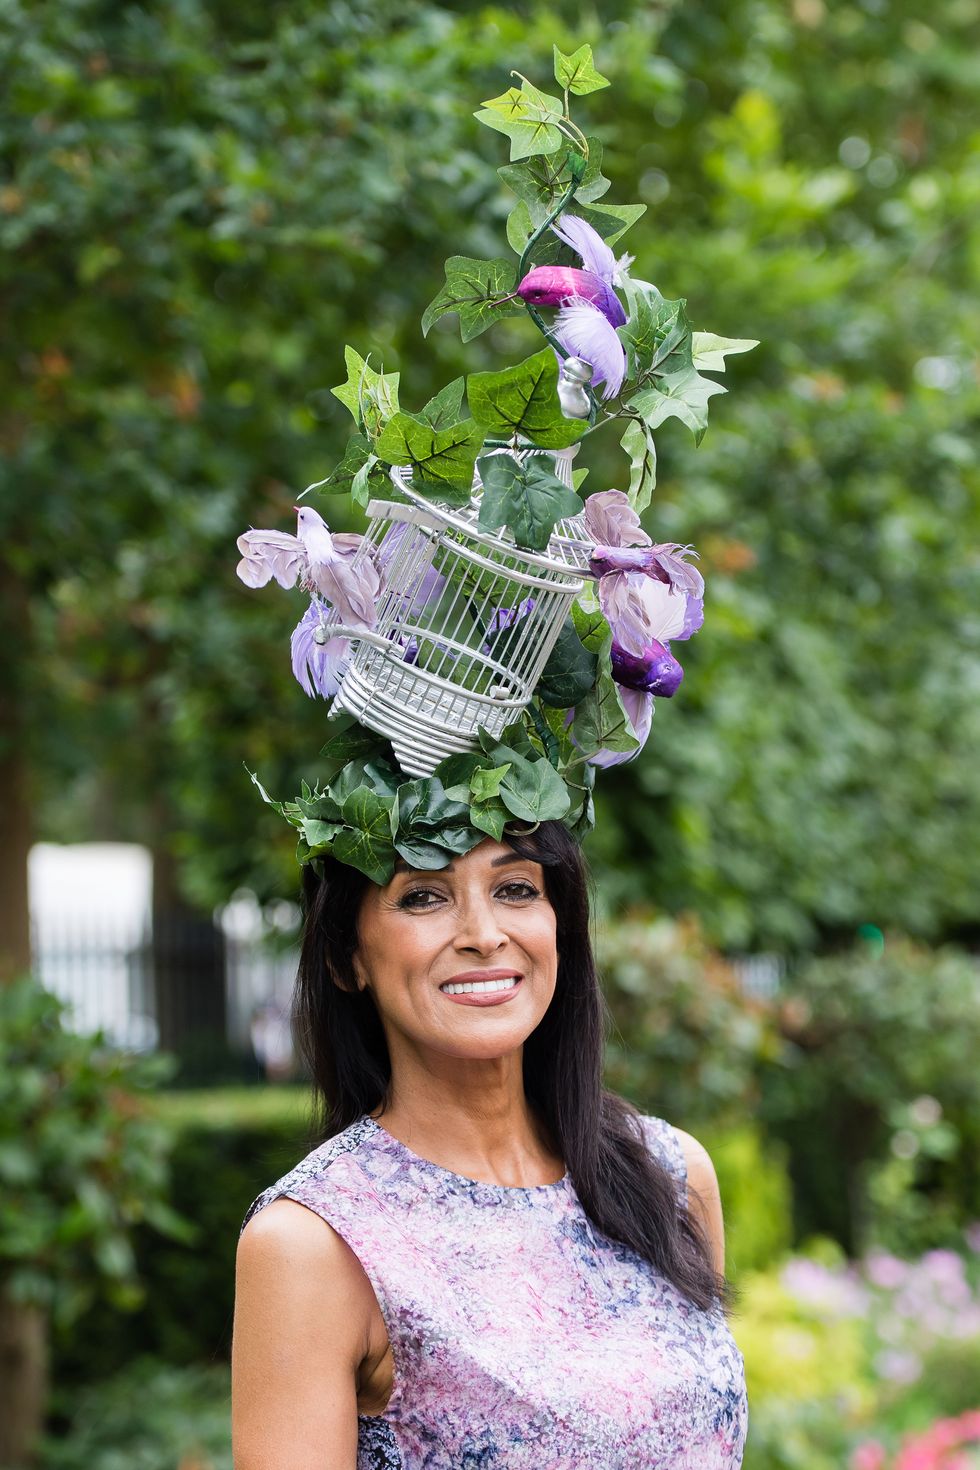 https://hips.hearstapps.com/hmg-prod.s3.amazonaws.com/images/hbz-royal-ascot-hats-jackie-st-clair-gettyimages-978577996-1529432844.jpg?crop=1xw:1xh;center,top&resize=980:*